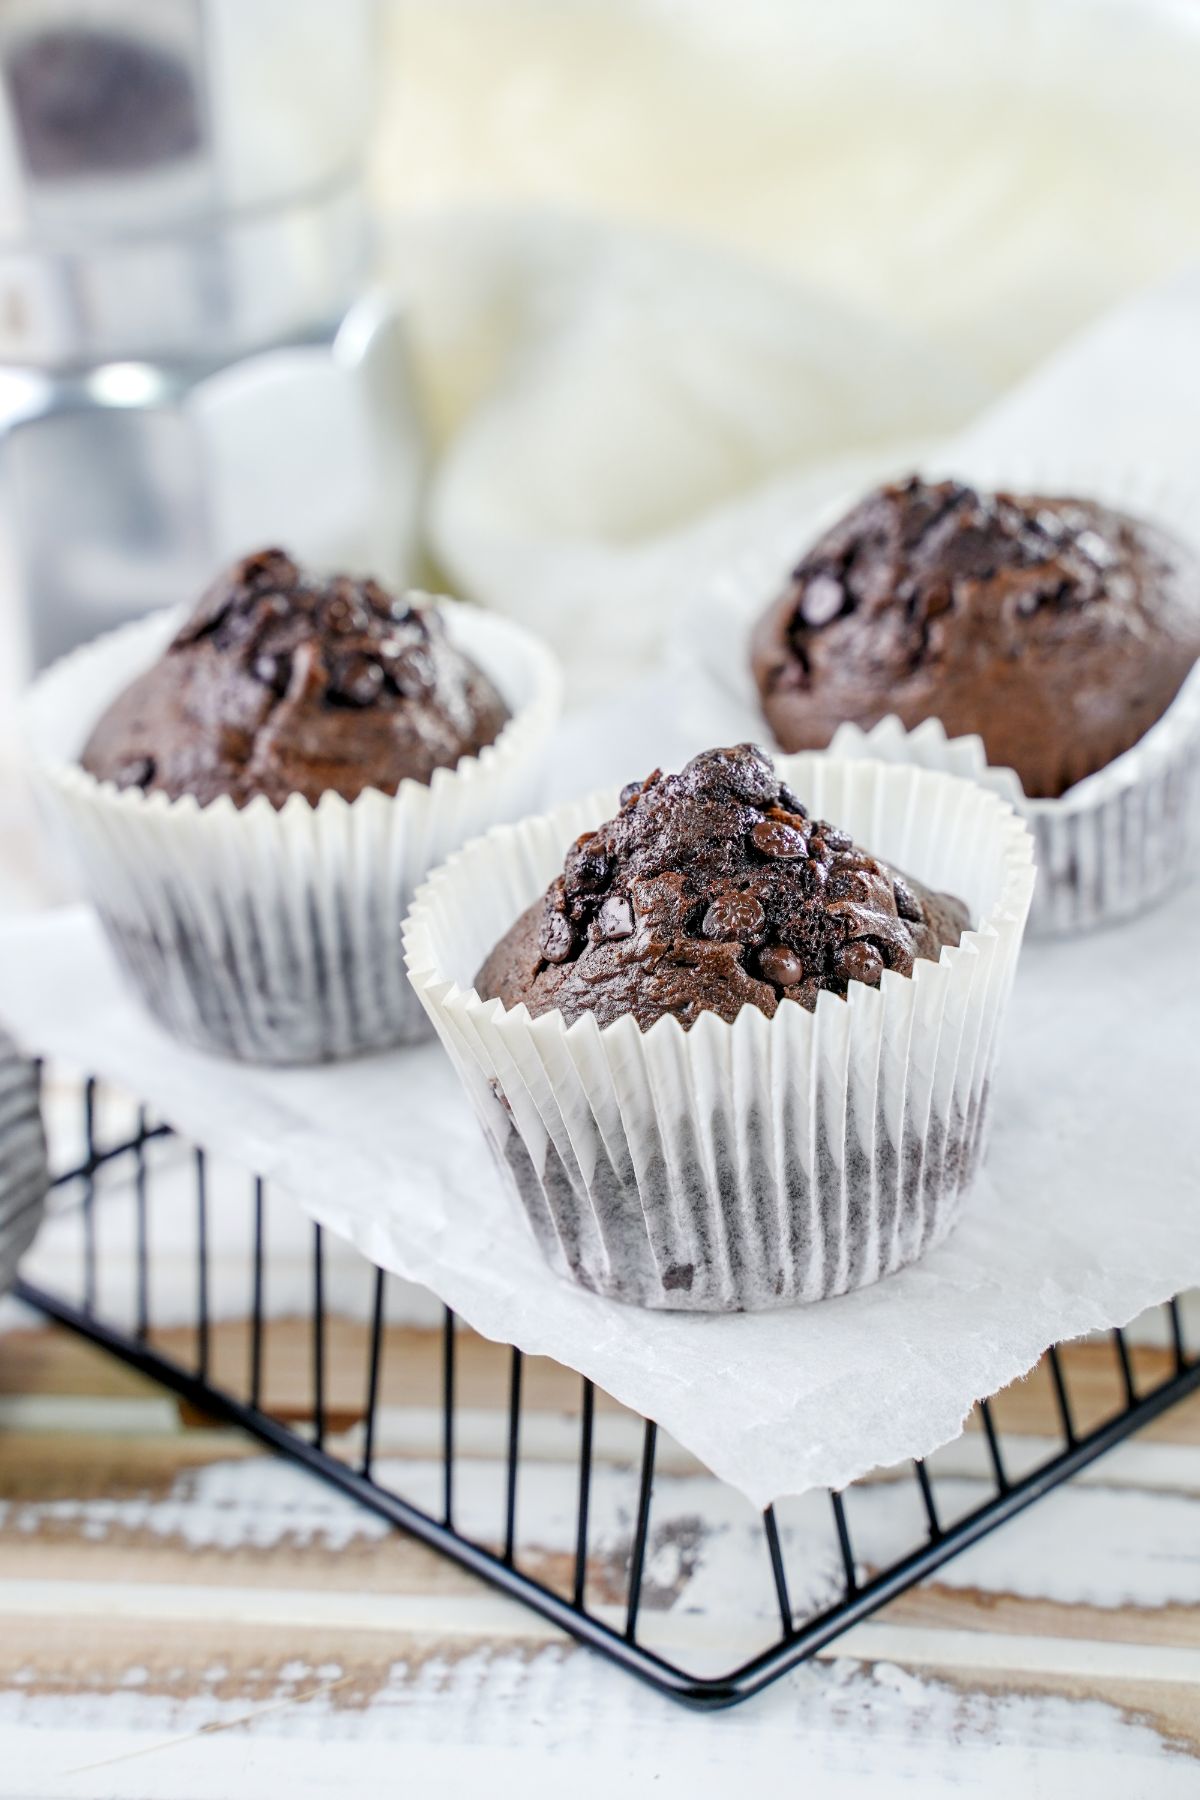 three chocolate chip muffins in white liner on upside down wire basket